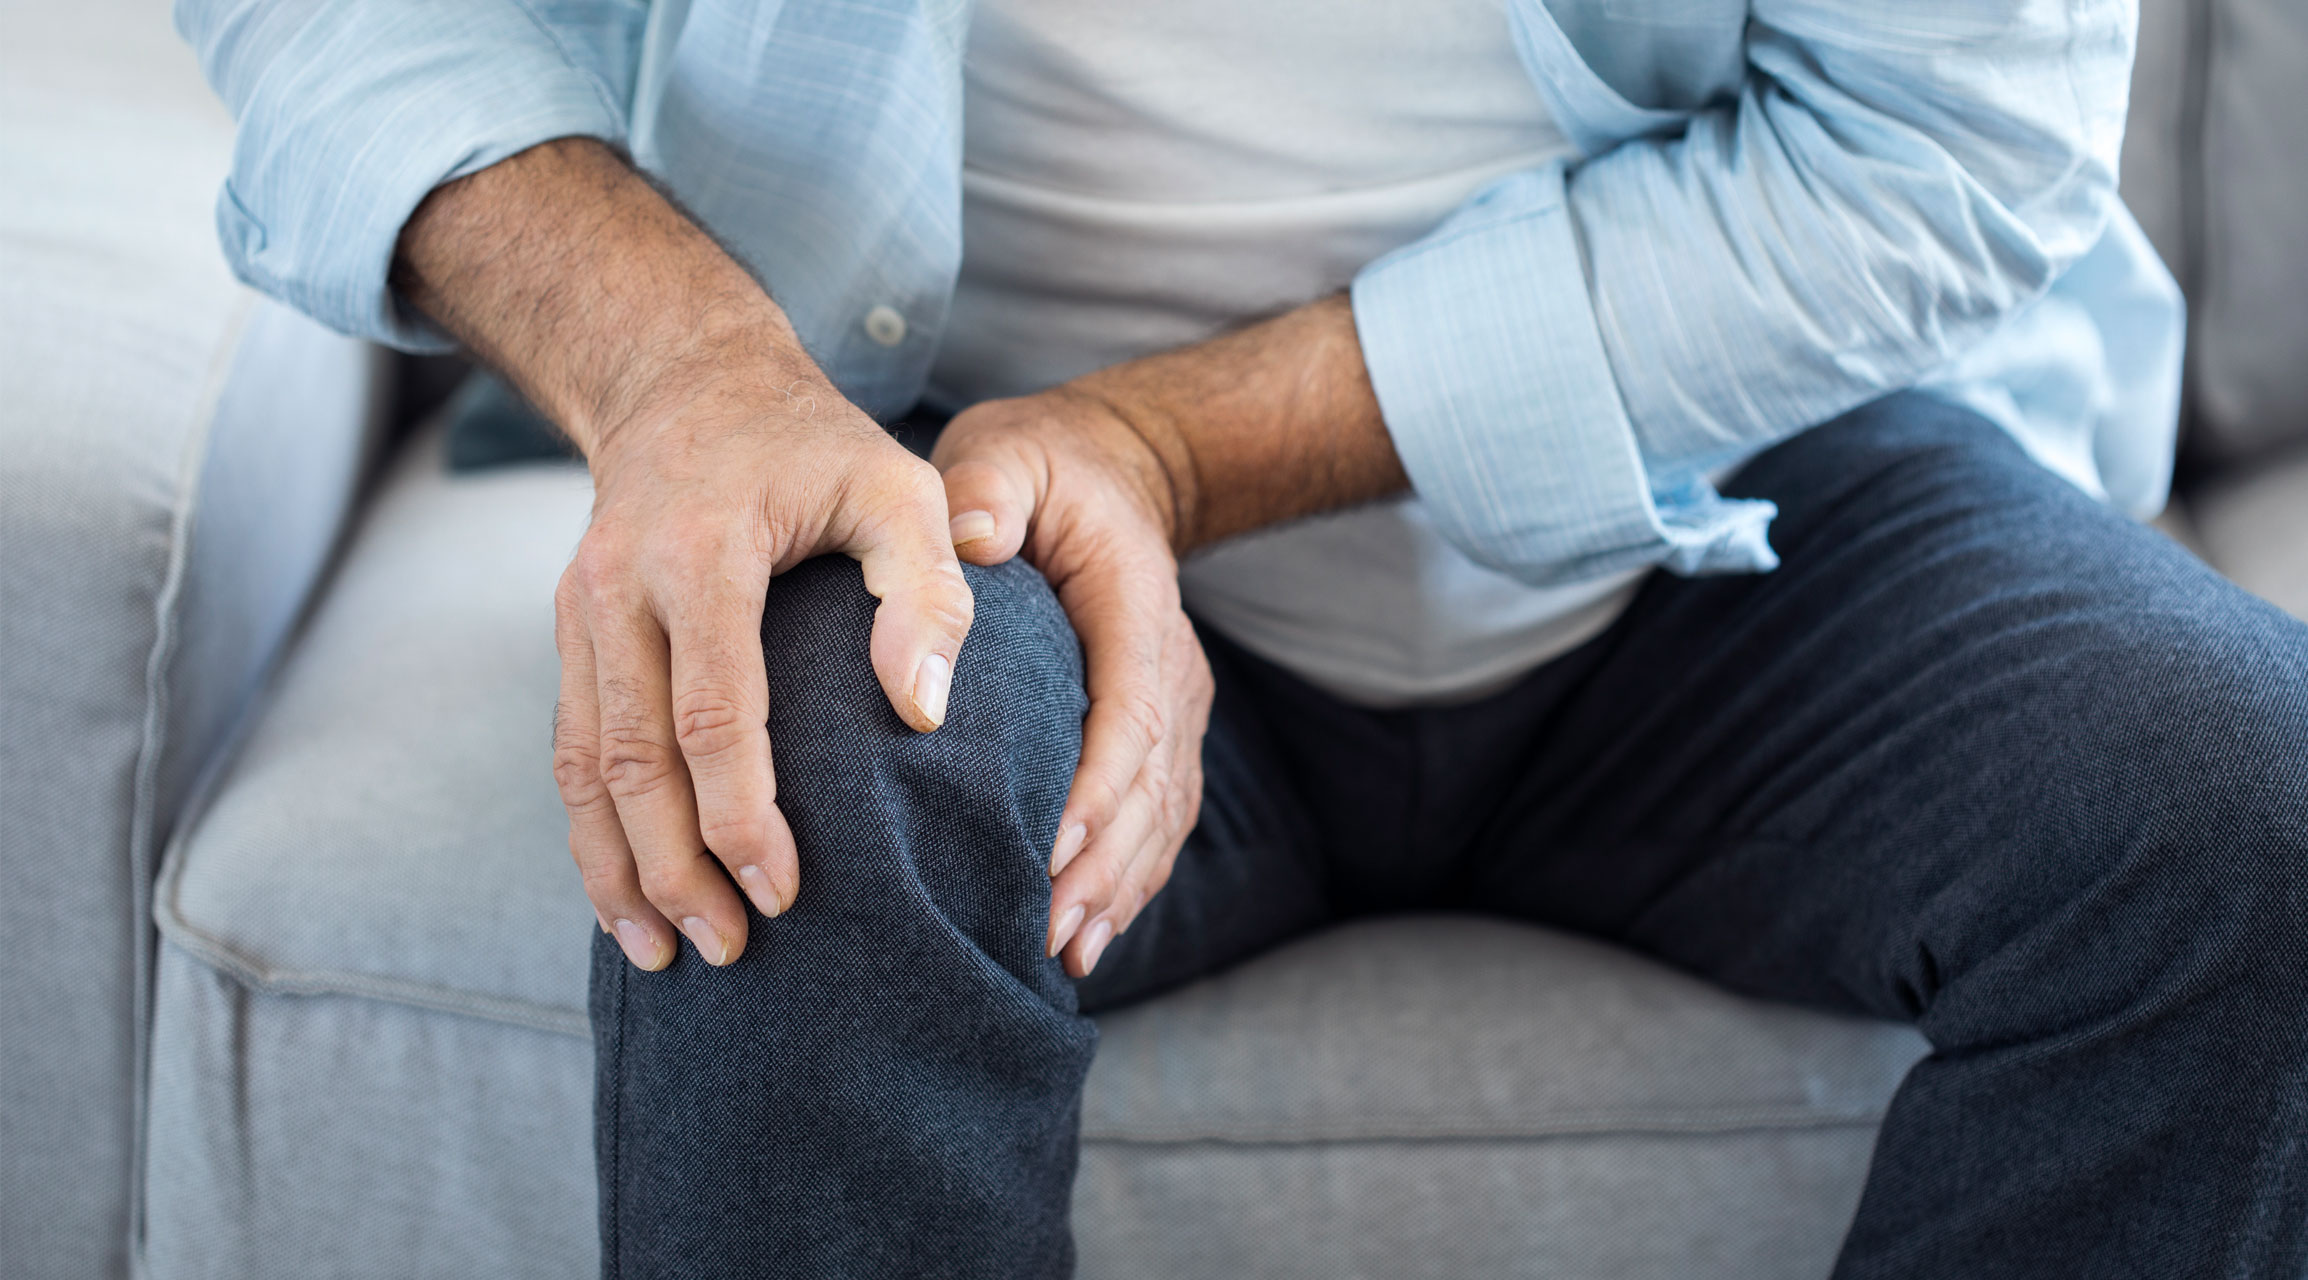 Learn about the reasons for knee pain